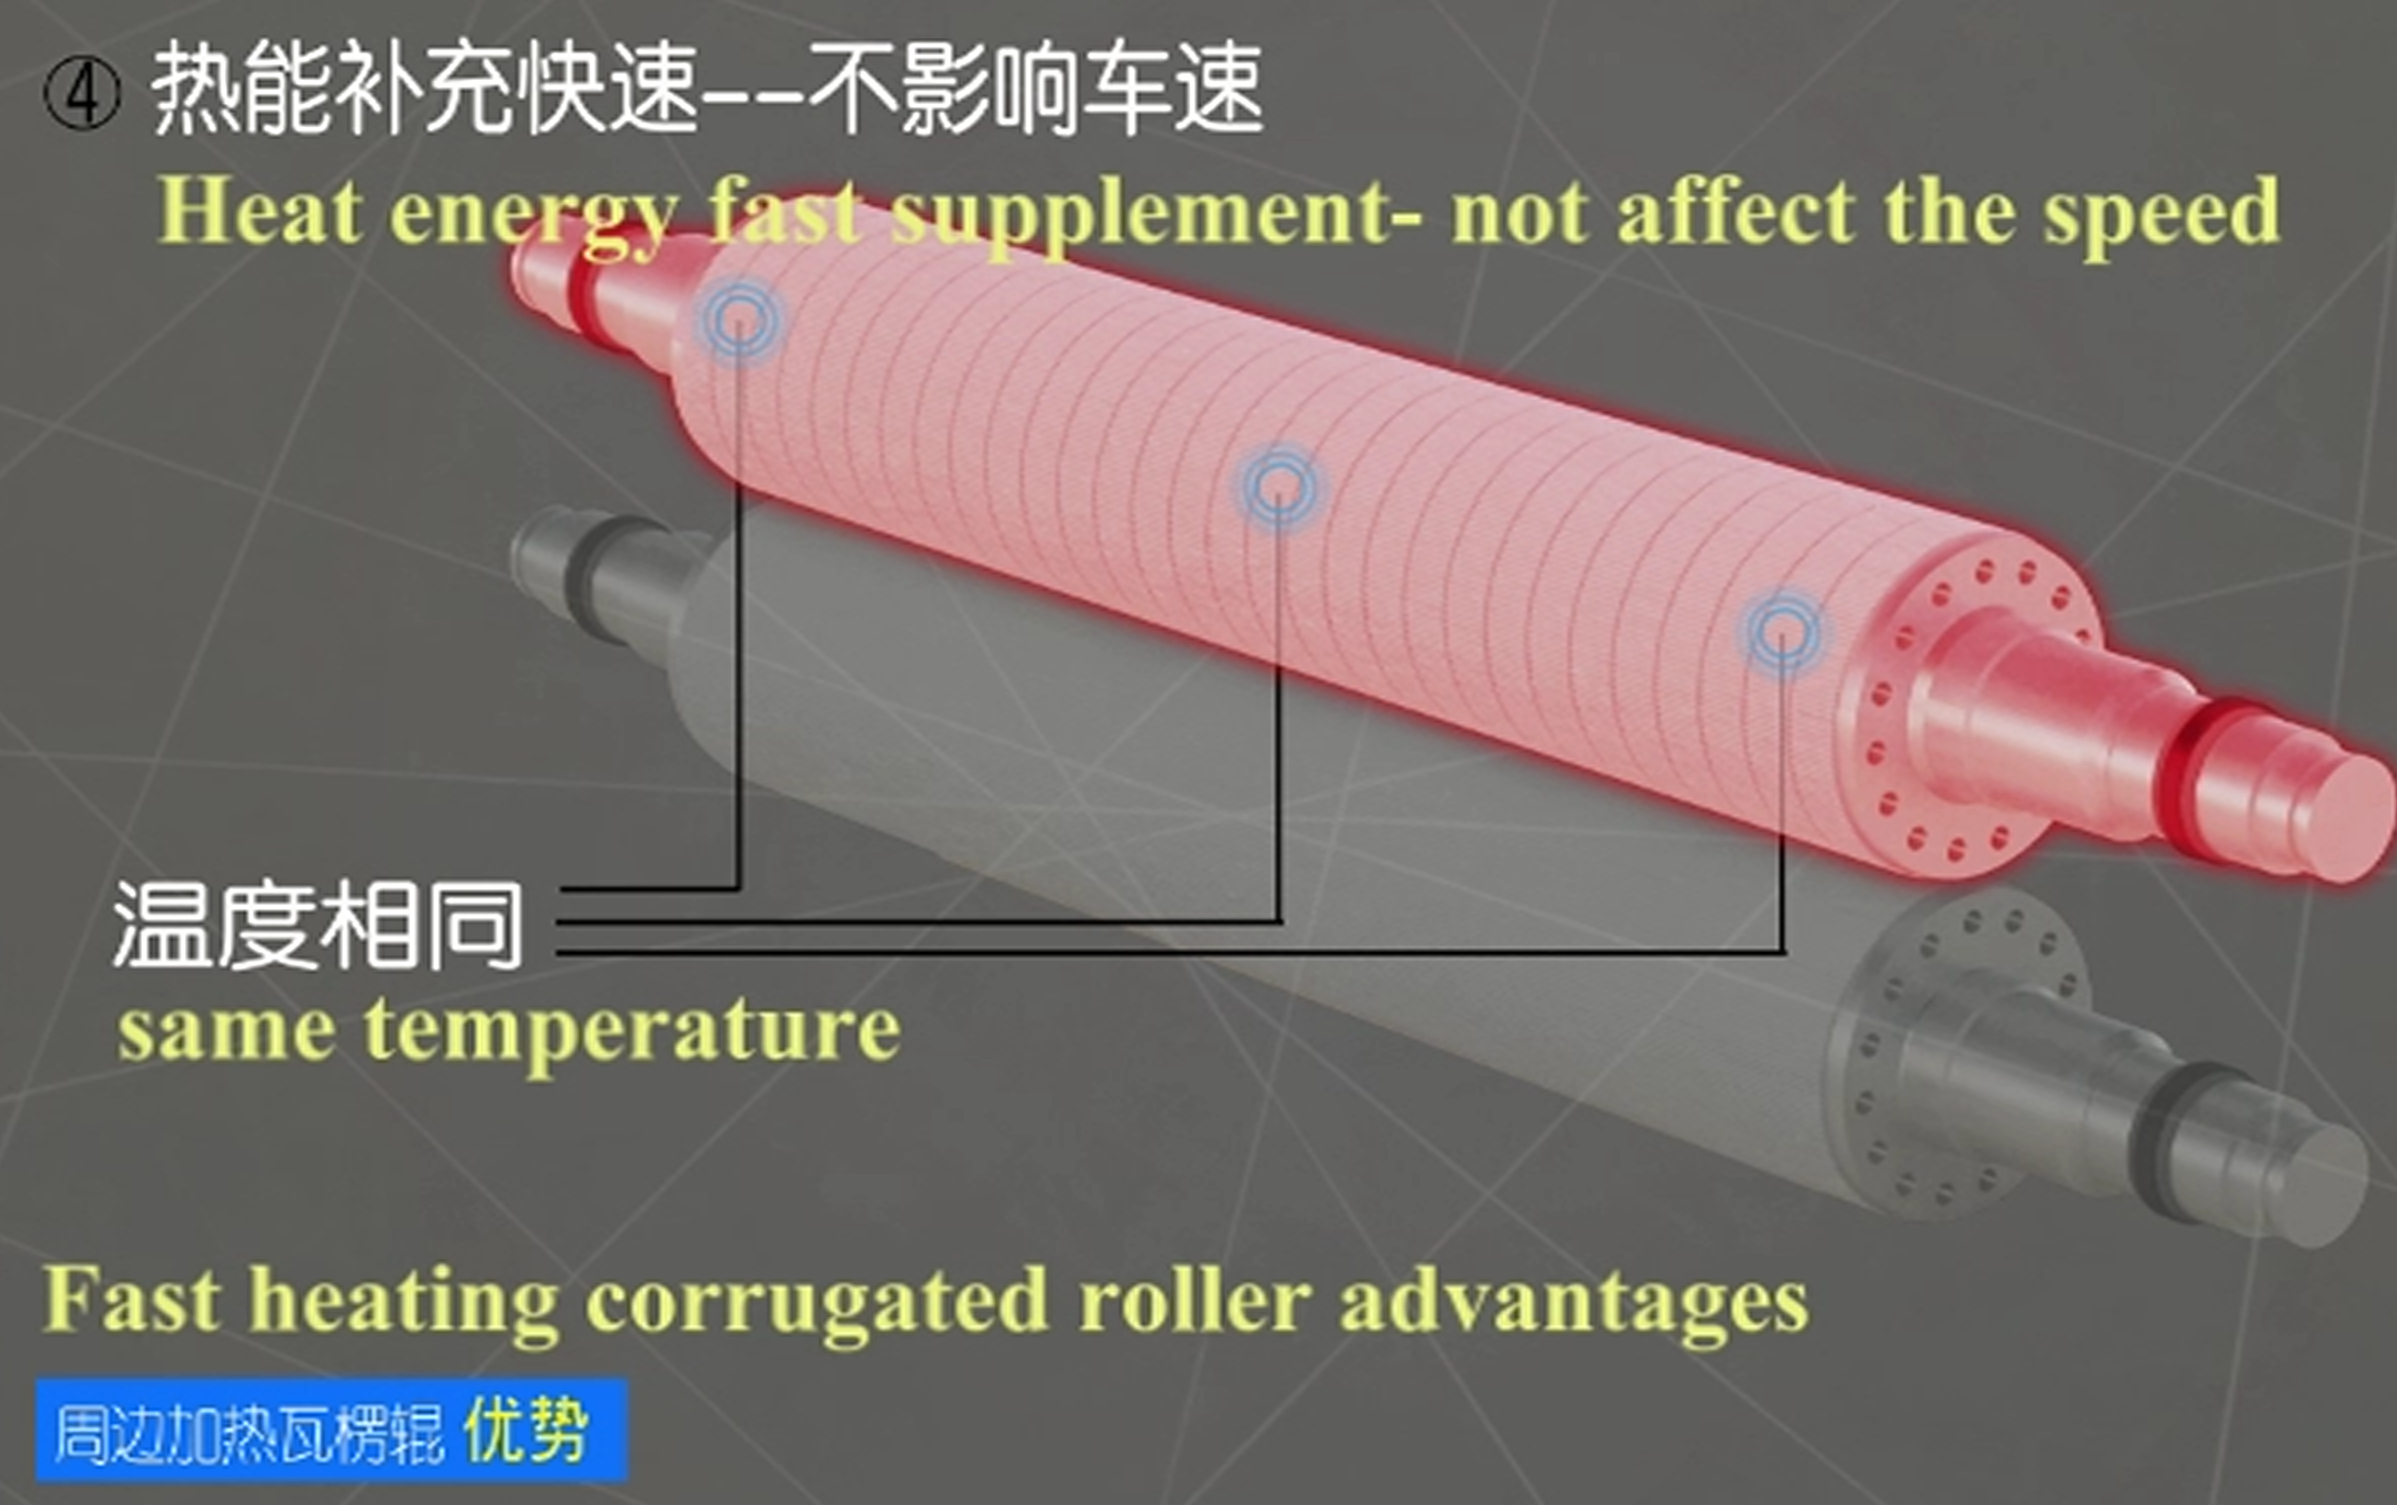 FAST HEATING CORRUGATED ROLLER ADVANTAGES